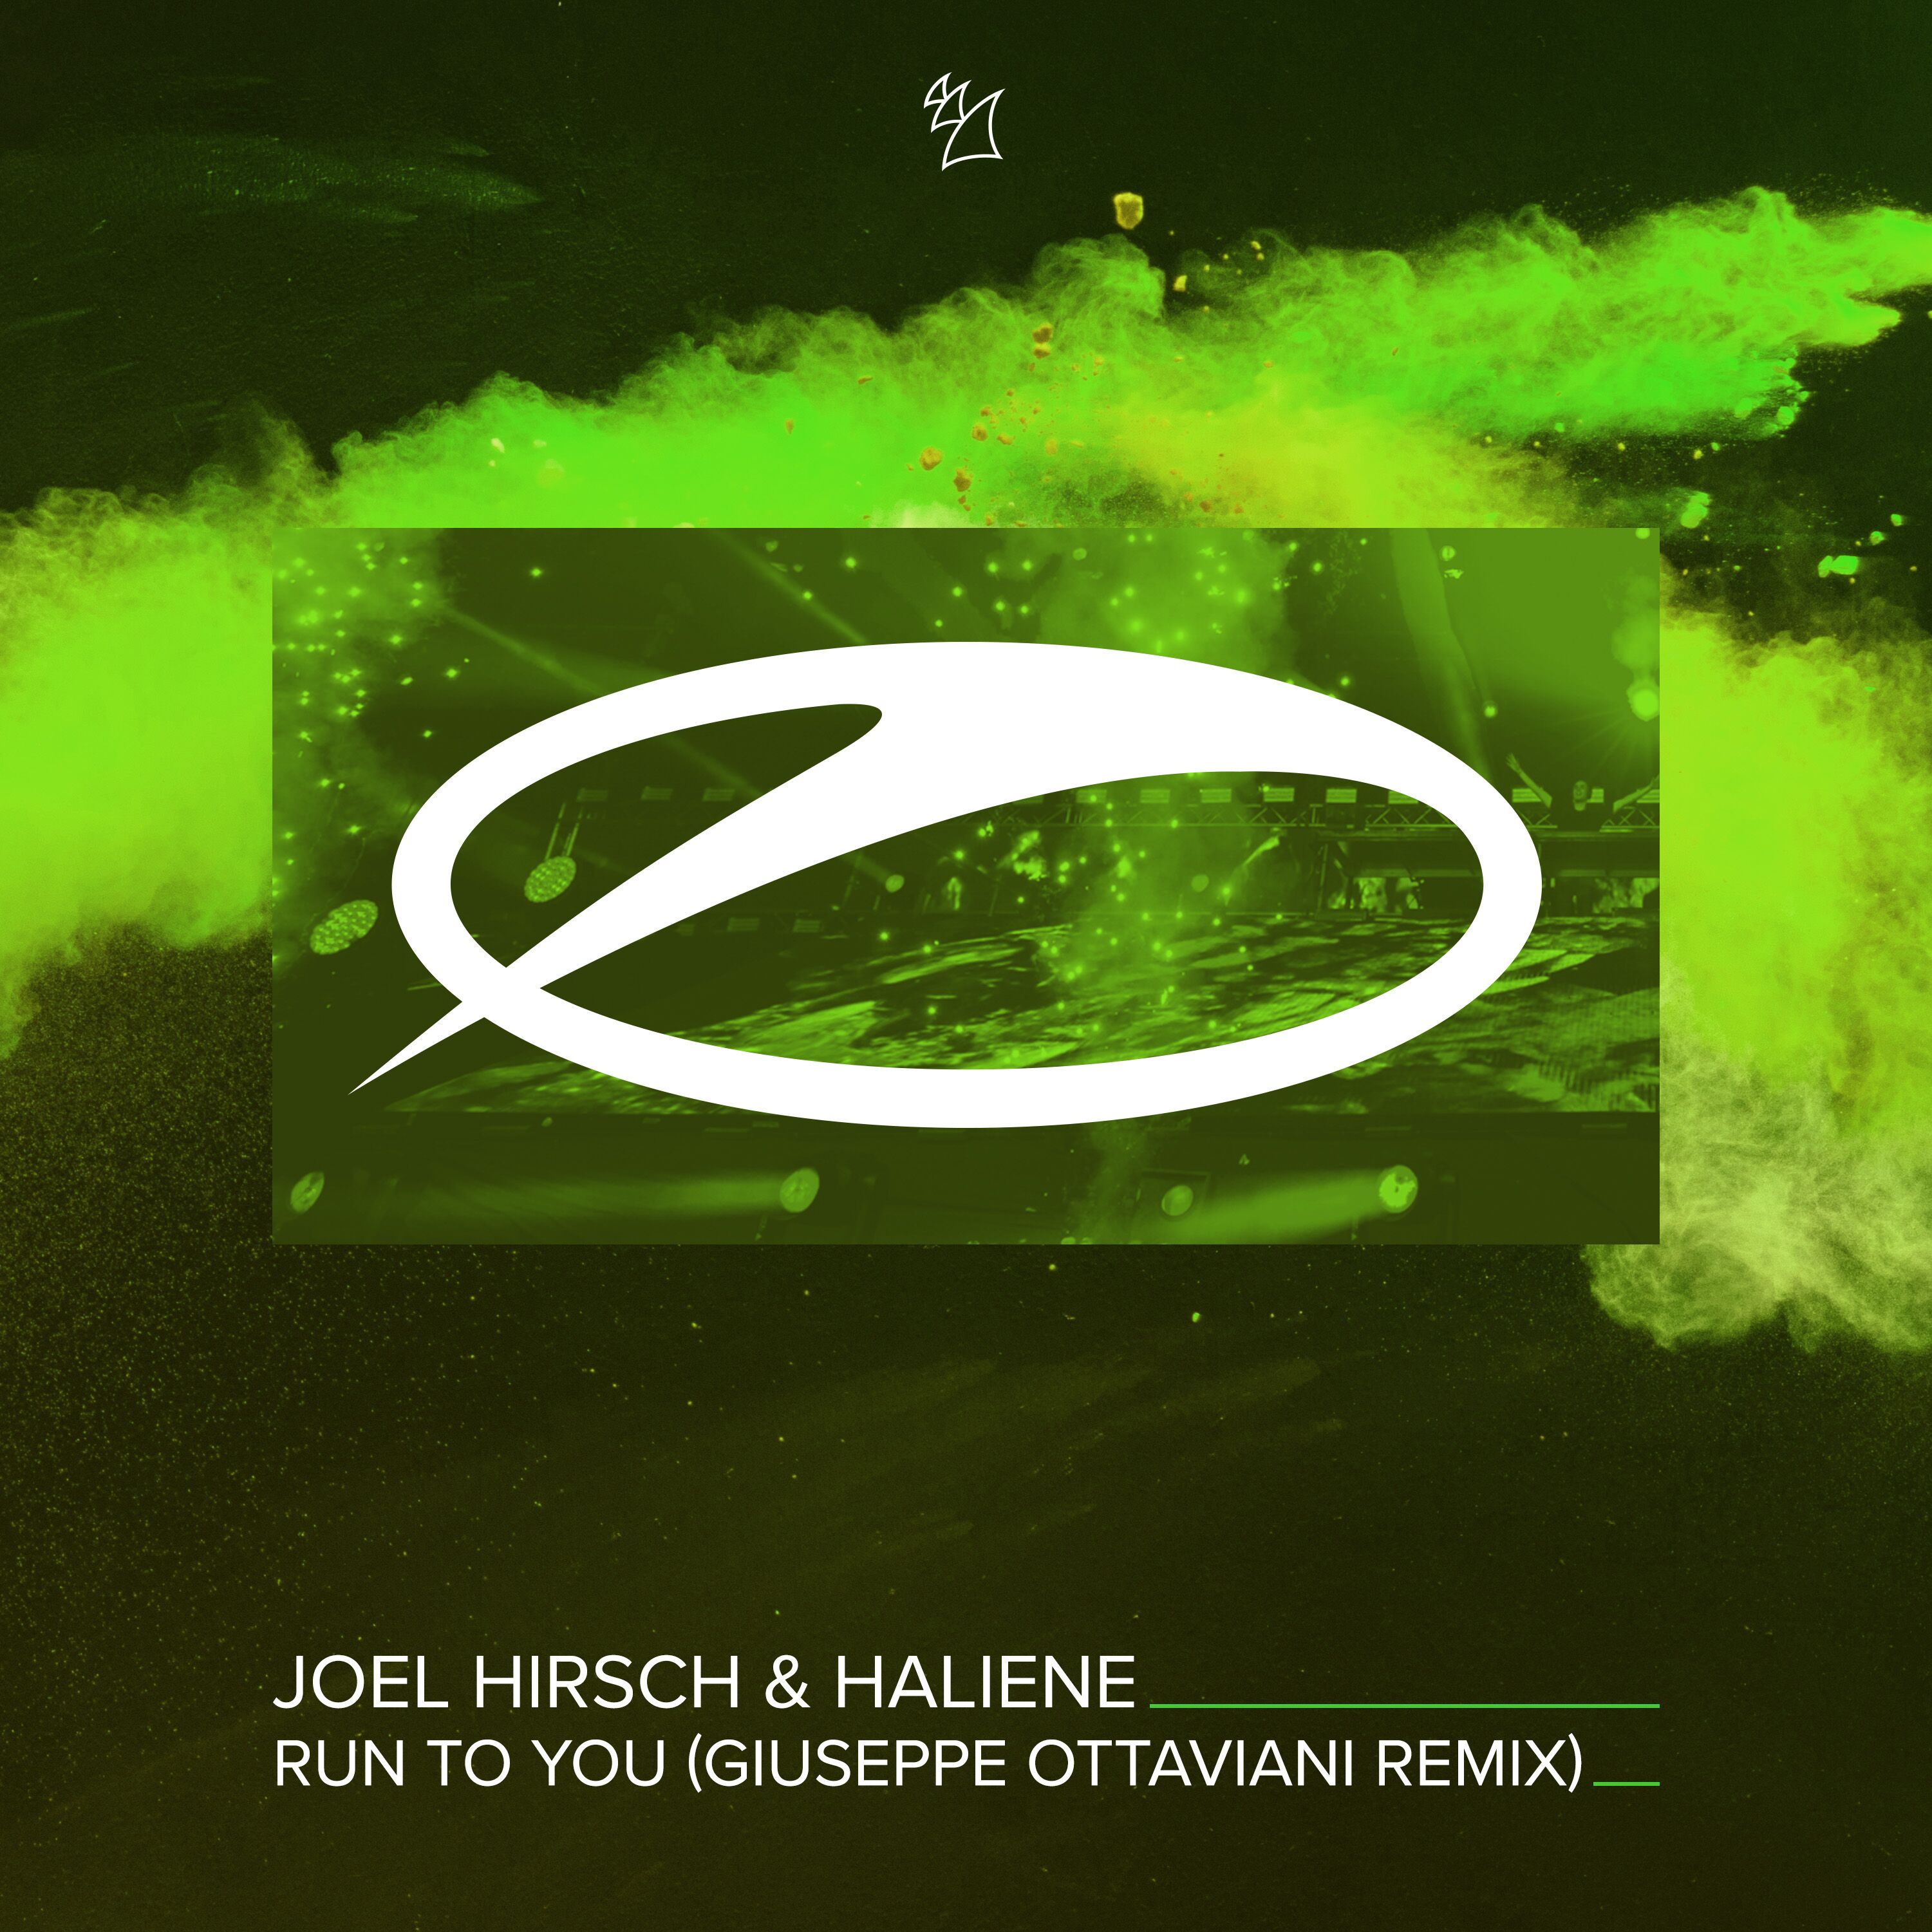 Joel Hirsch and HALIENE presents Run To You (Giuseppe Ottaviani Remix) on A State Of Trance